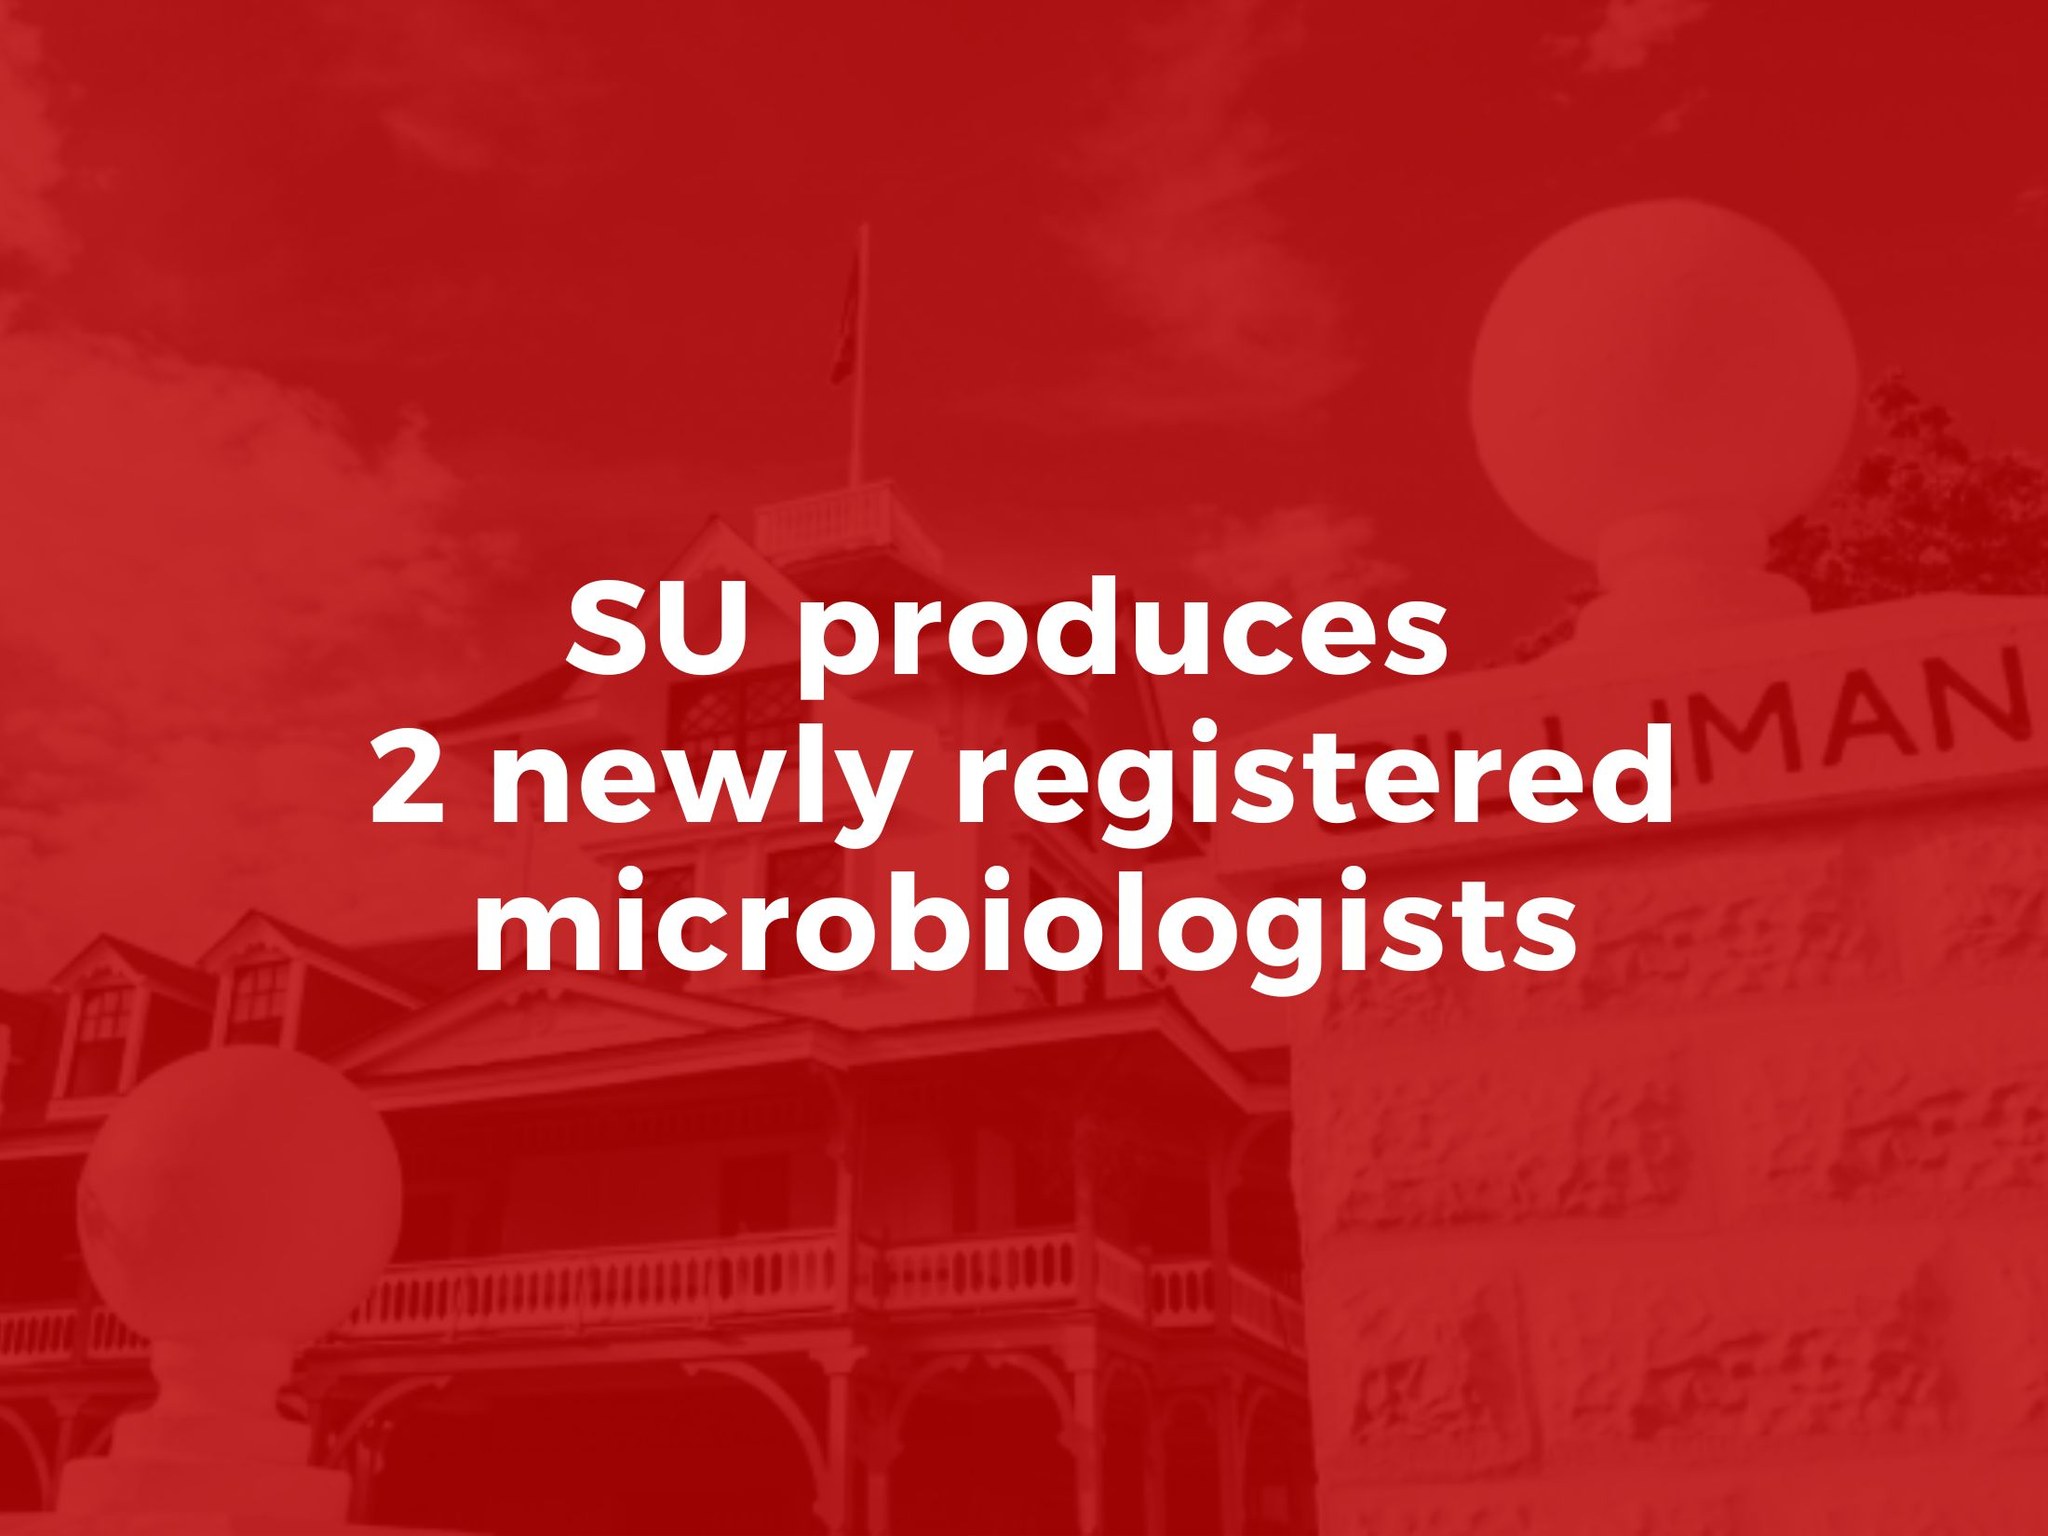 Silliman University (SU) produces two (2) newly registered microbiologists